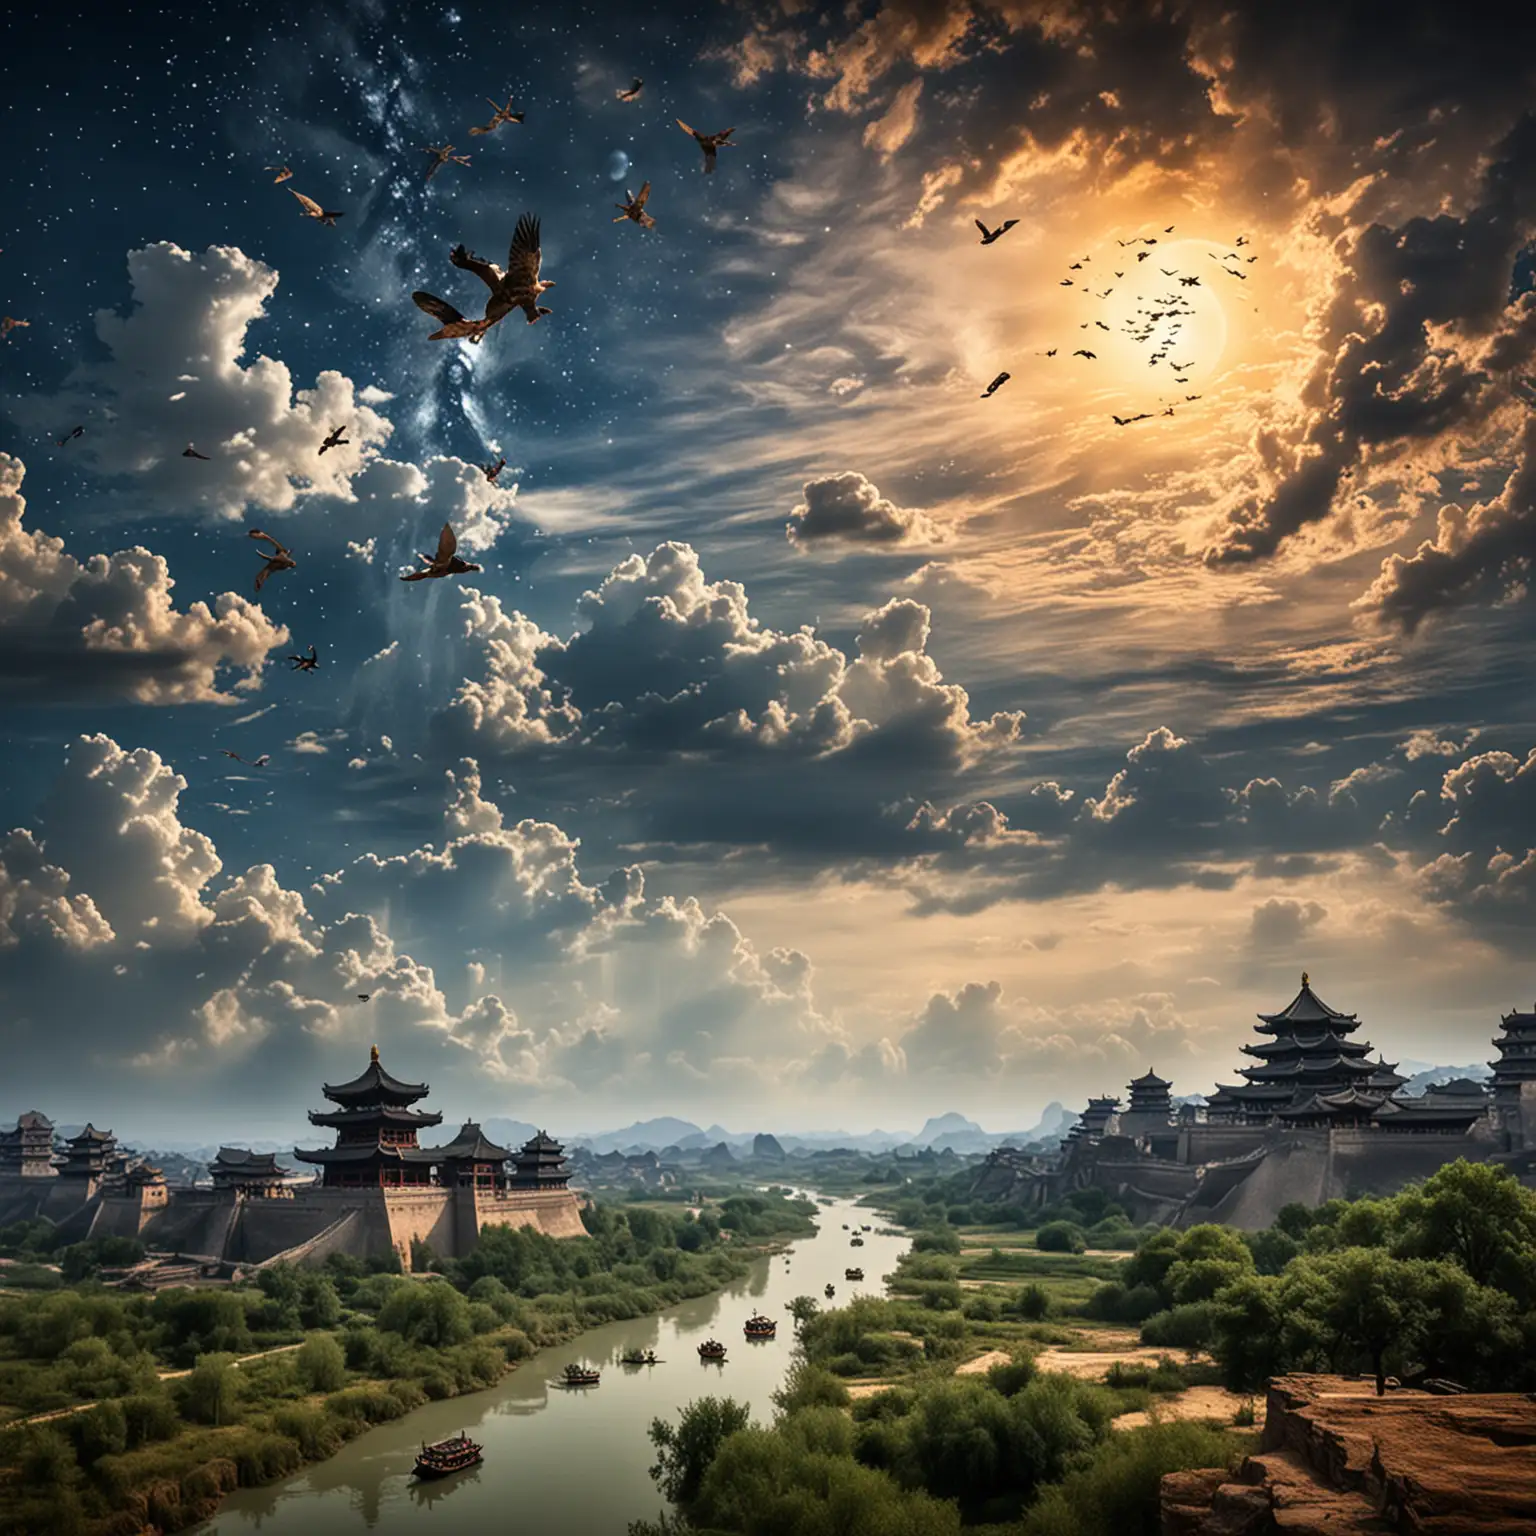 Historical-Sky-of-China-Ancient-Architecture-and-Traditional-Pagodas-Under-a-Dramatic-Sky